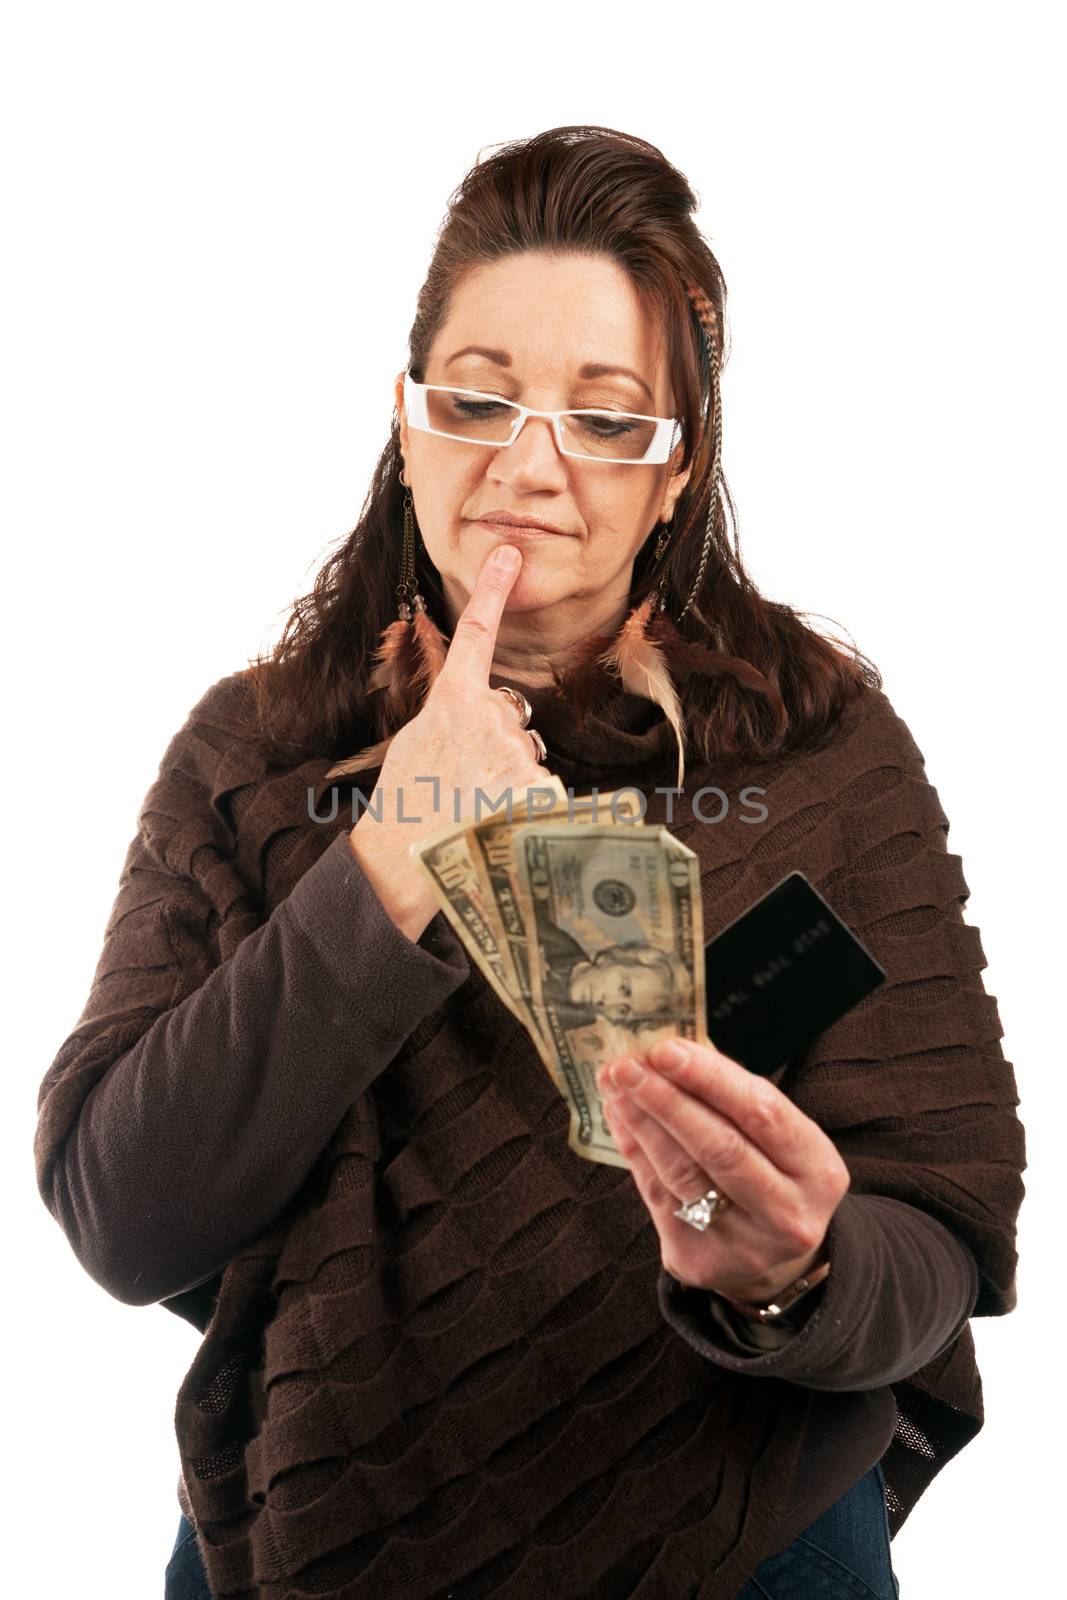 Middle aged woman holding up a blank credit card business card shoppers club card or gift card along with some cash in her other hand.